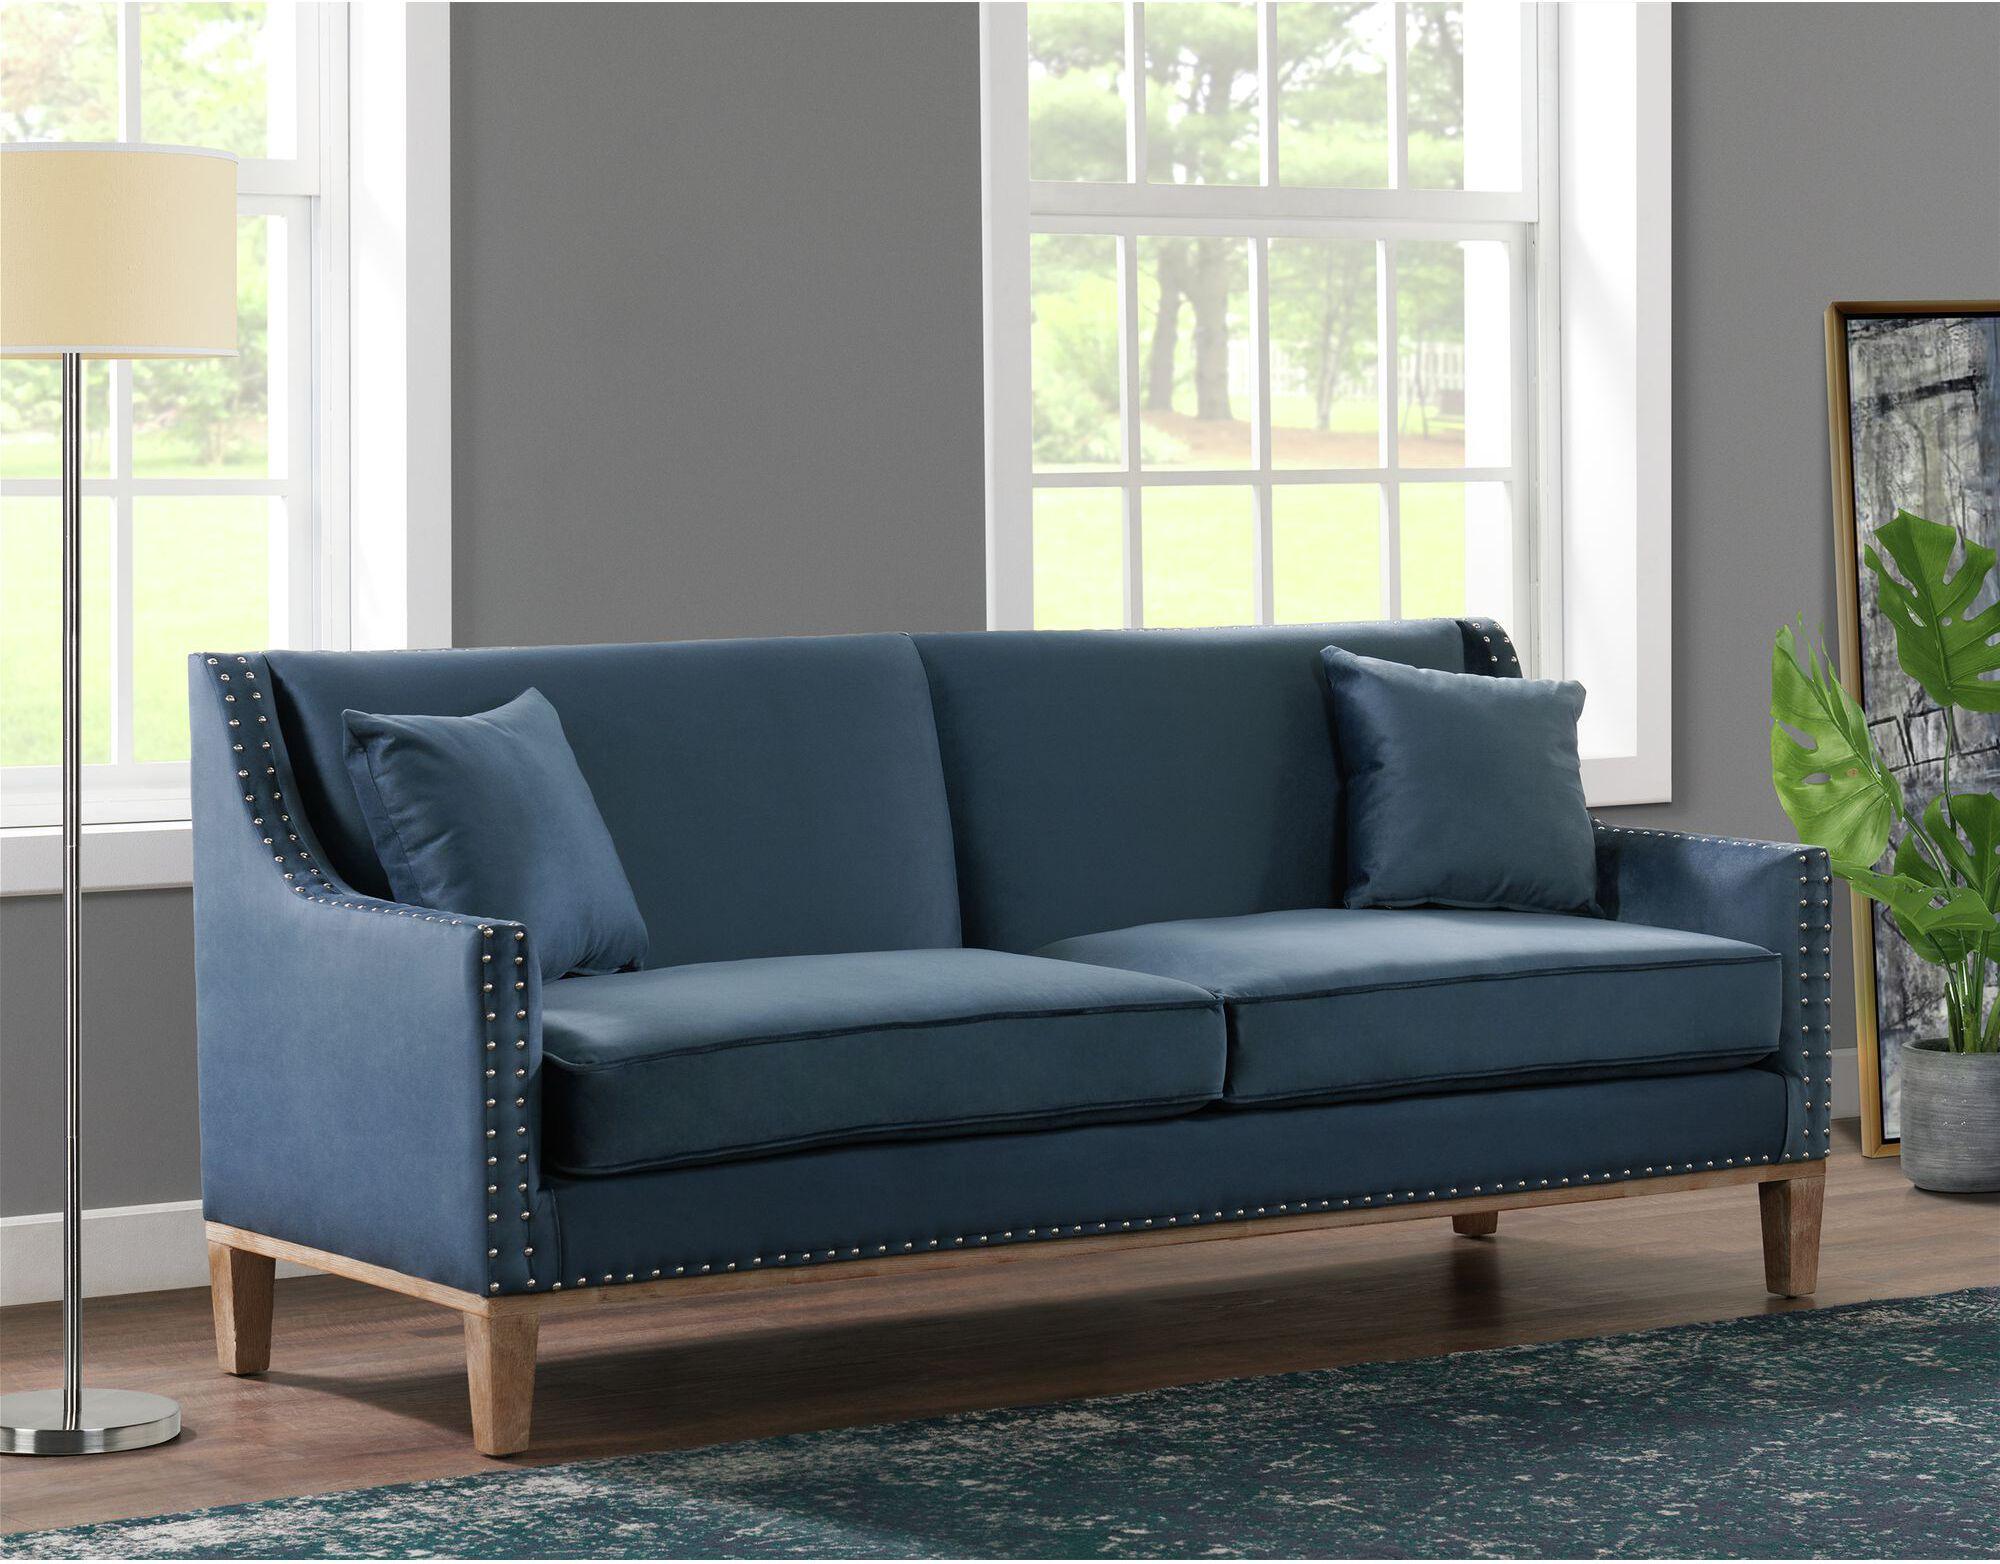 Elements Sofas & Couches - Aster Sofa Navy